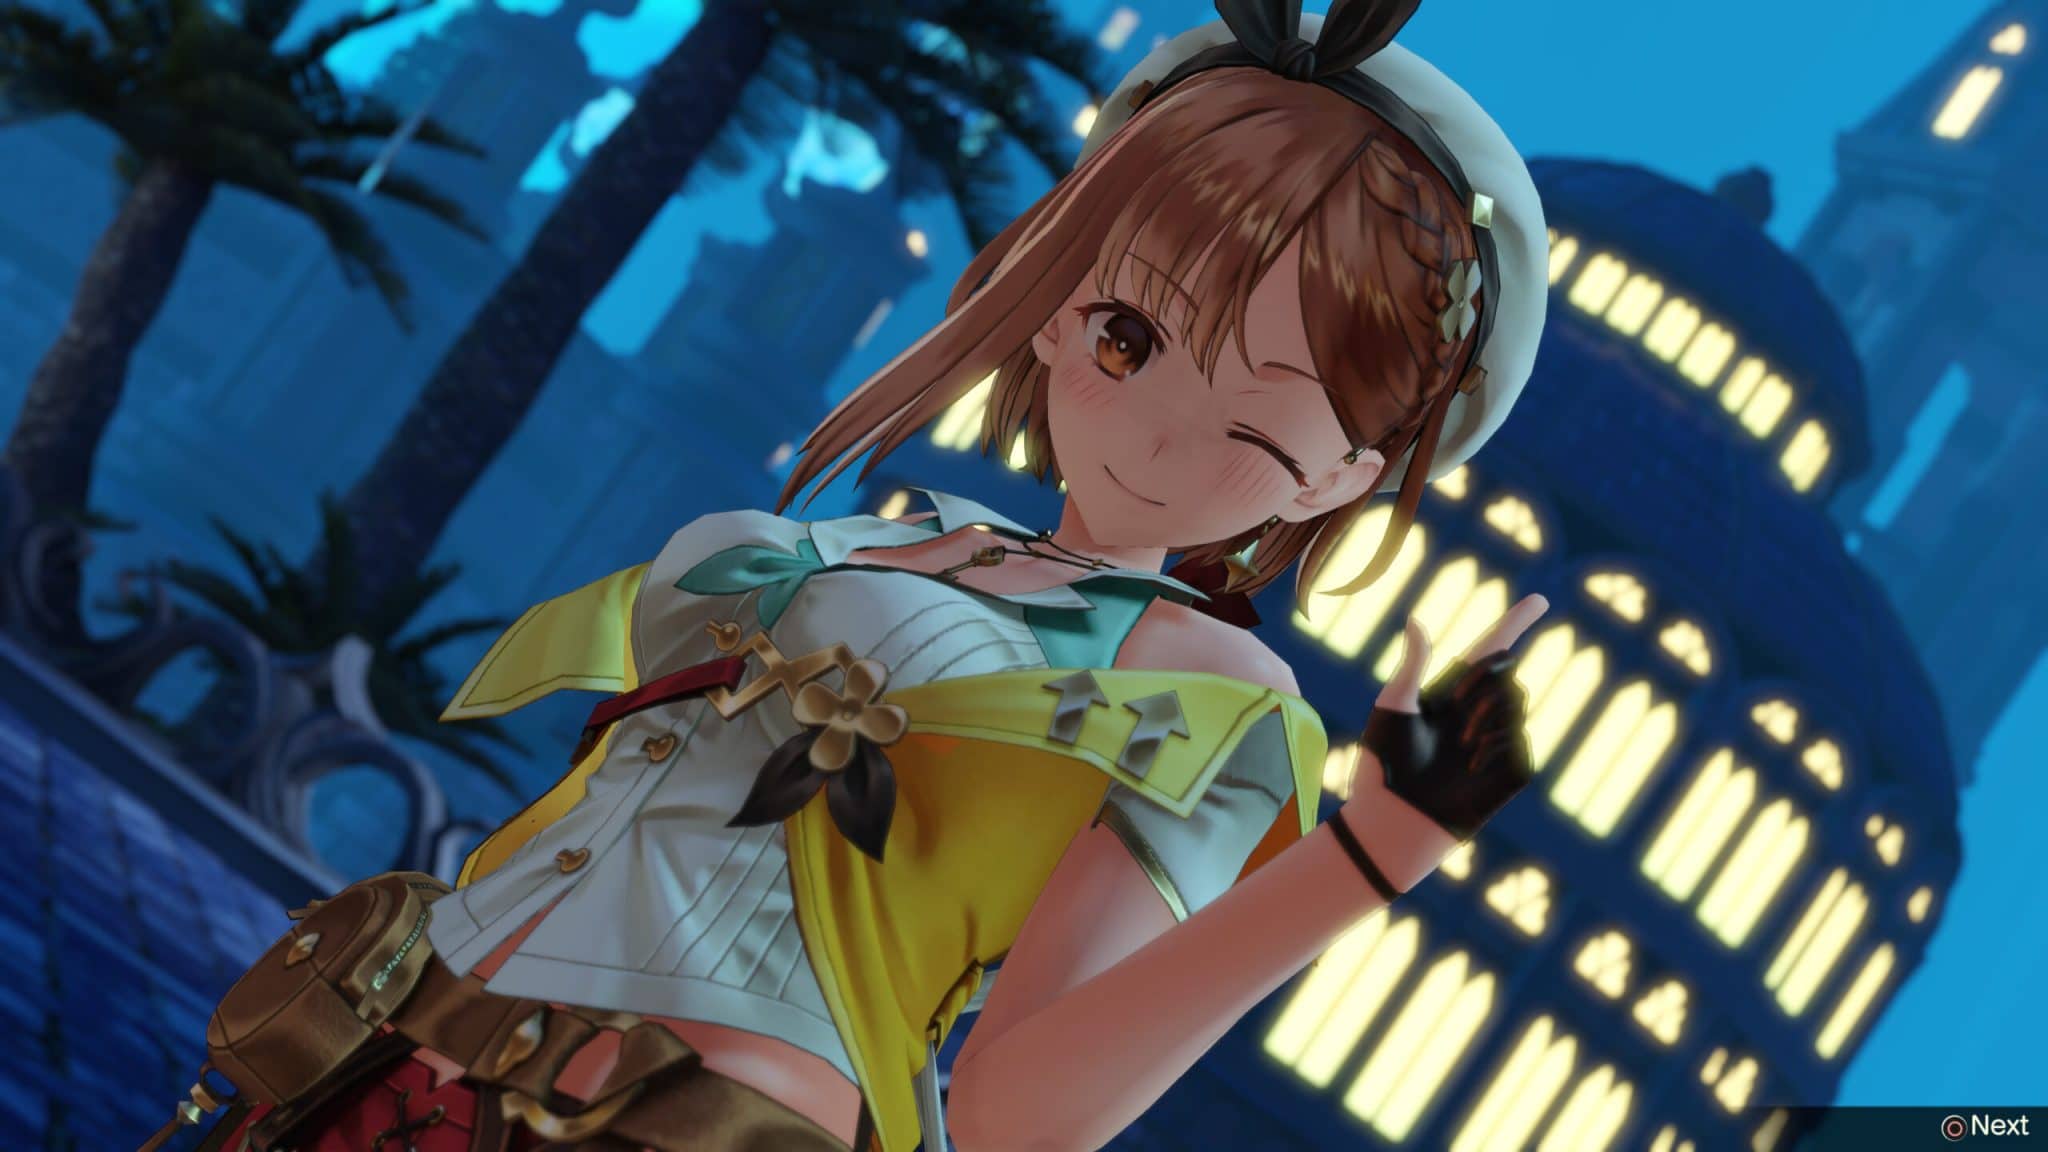 Atelier Ryza 2 Producer Details Faster Battle System, Confirms Post Game Offerings, and Teases Returning Alchemist for New Adventures